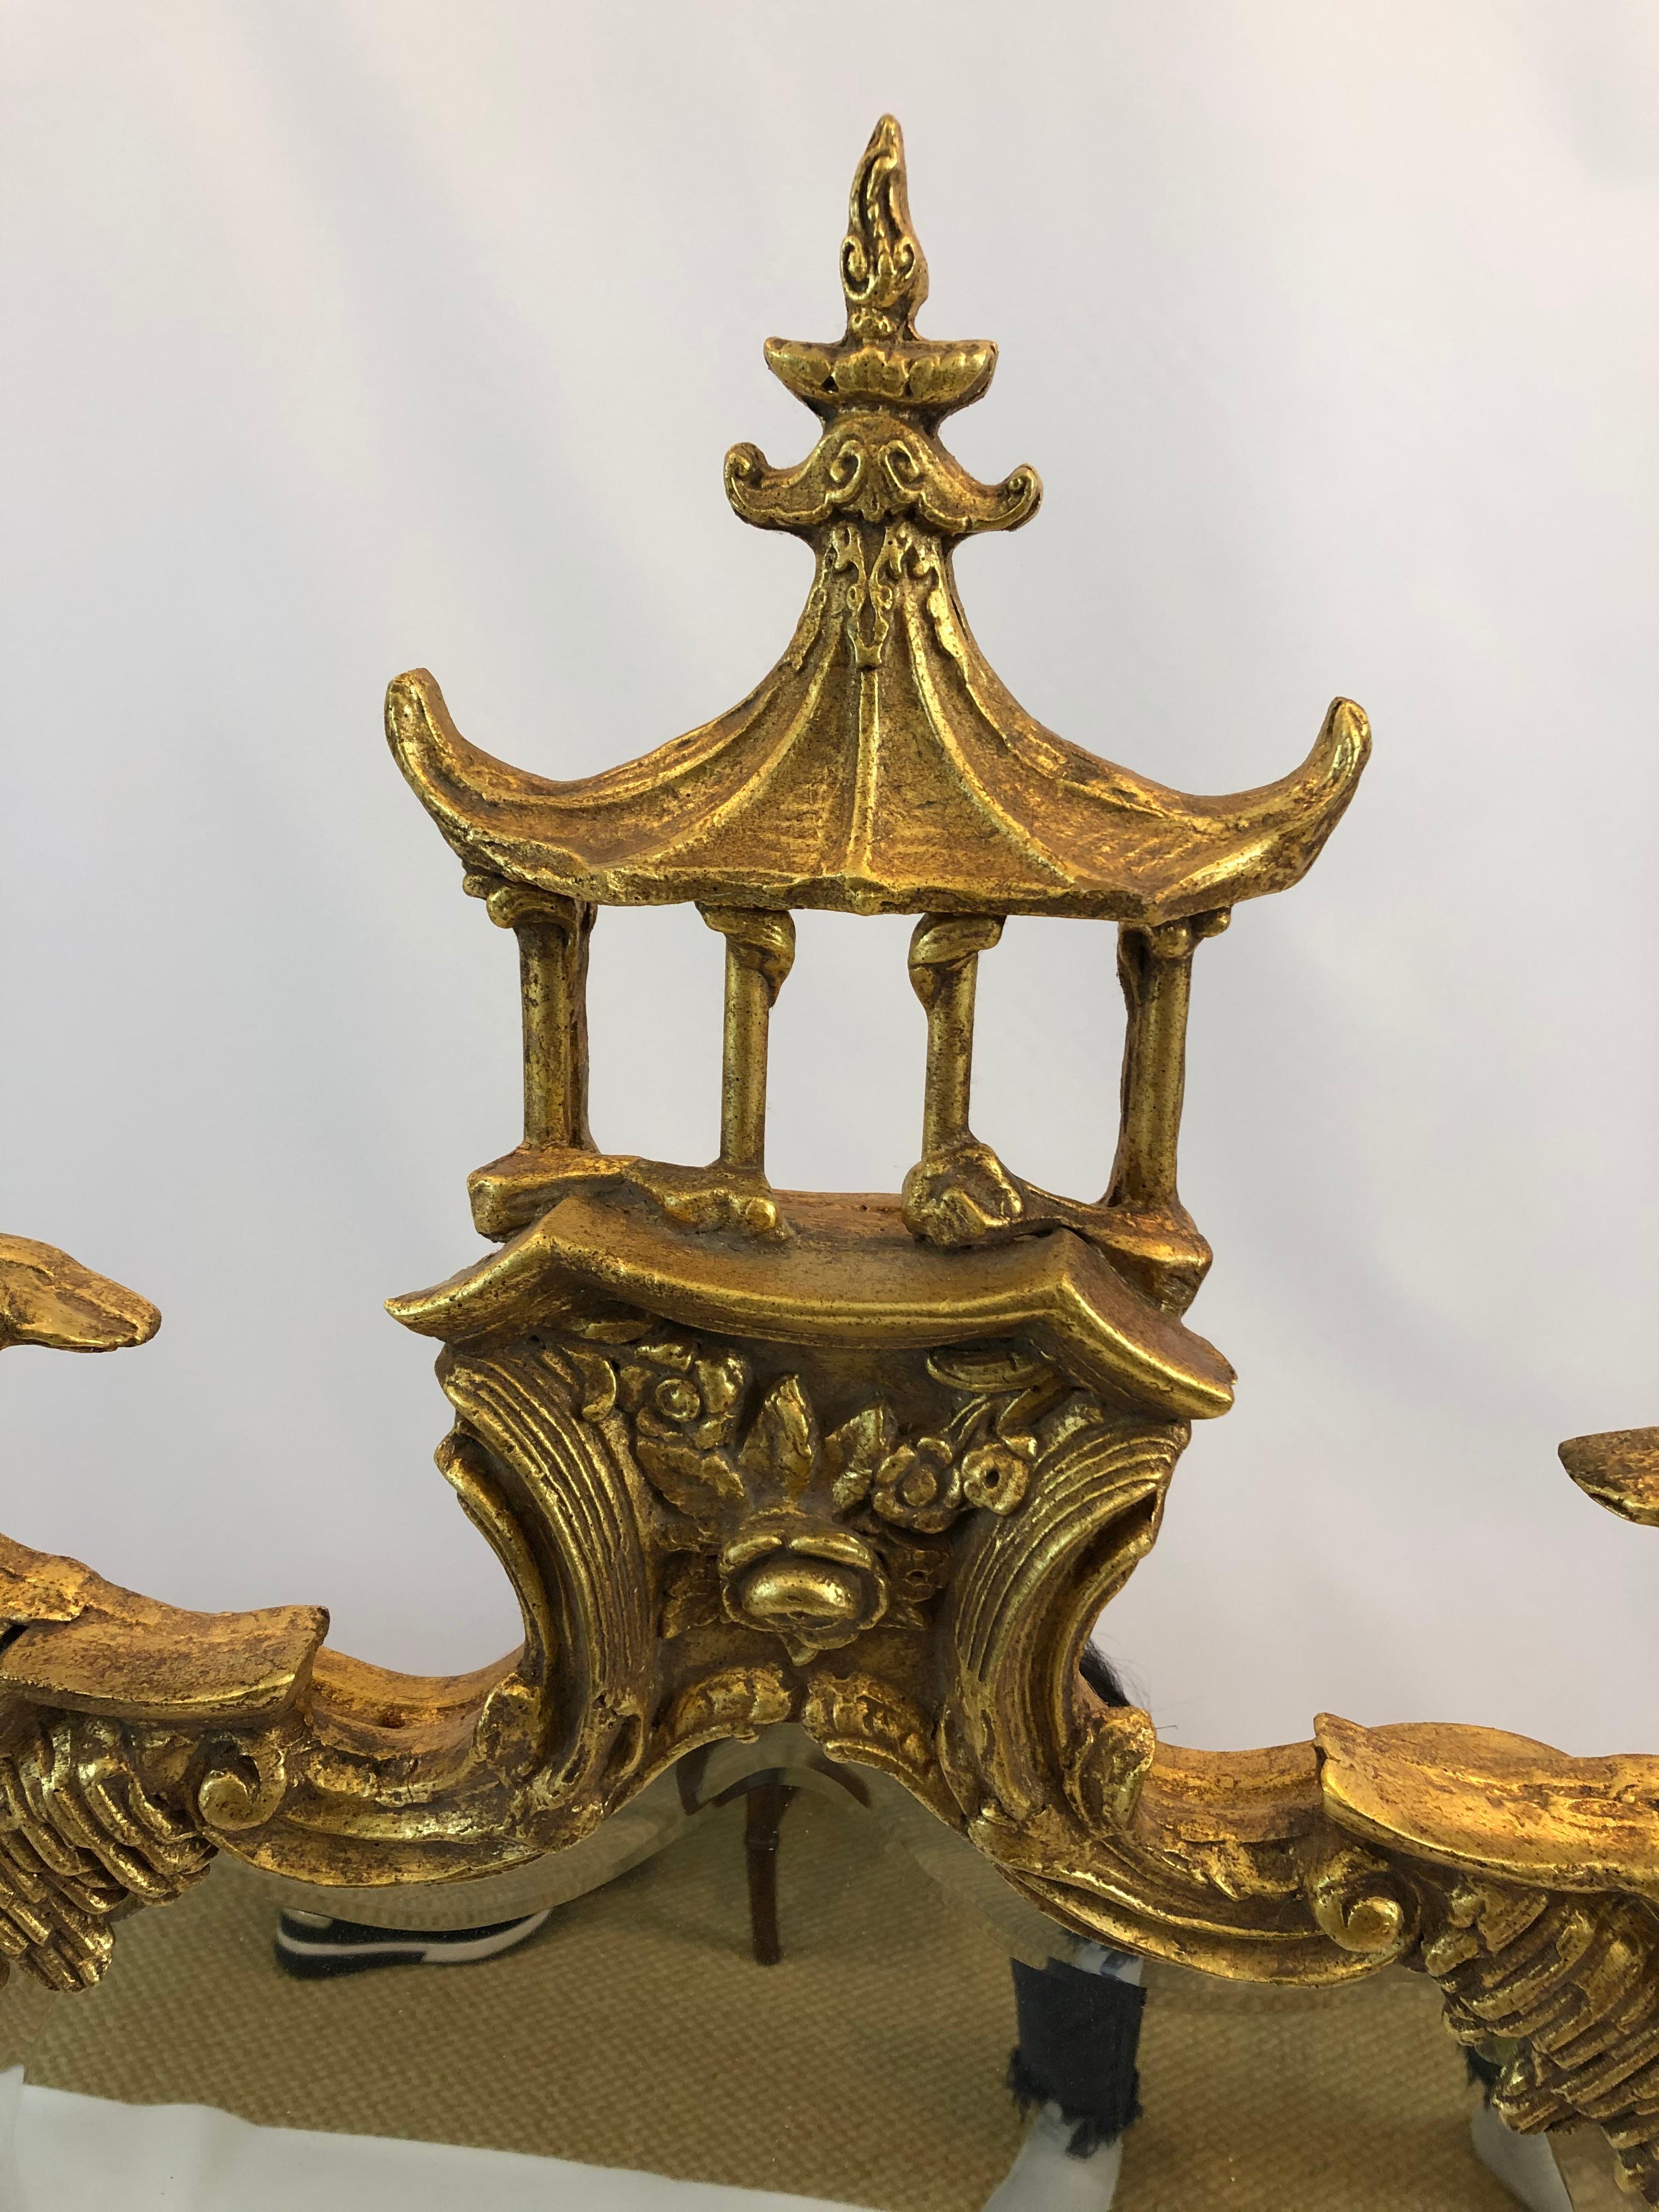 Stylish vertical mirror having marvelous pagoda at the top and winged dragons on each side with ornately carved gilded frame.